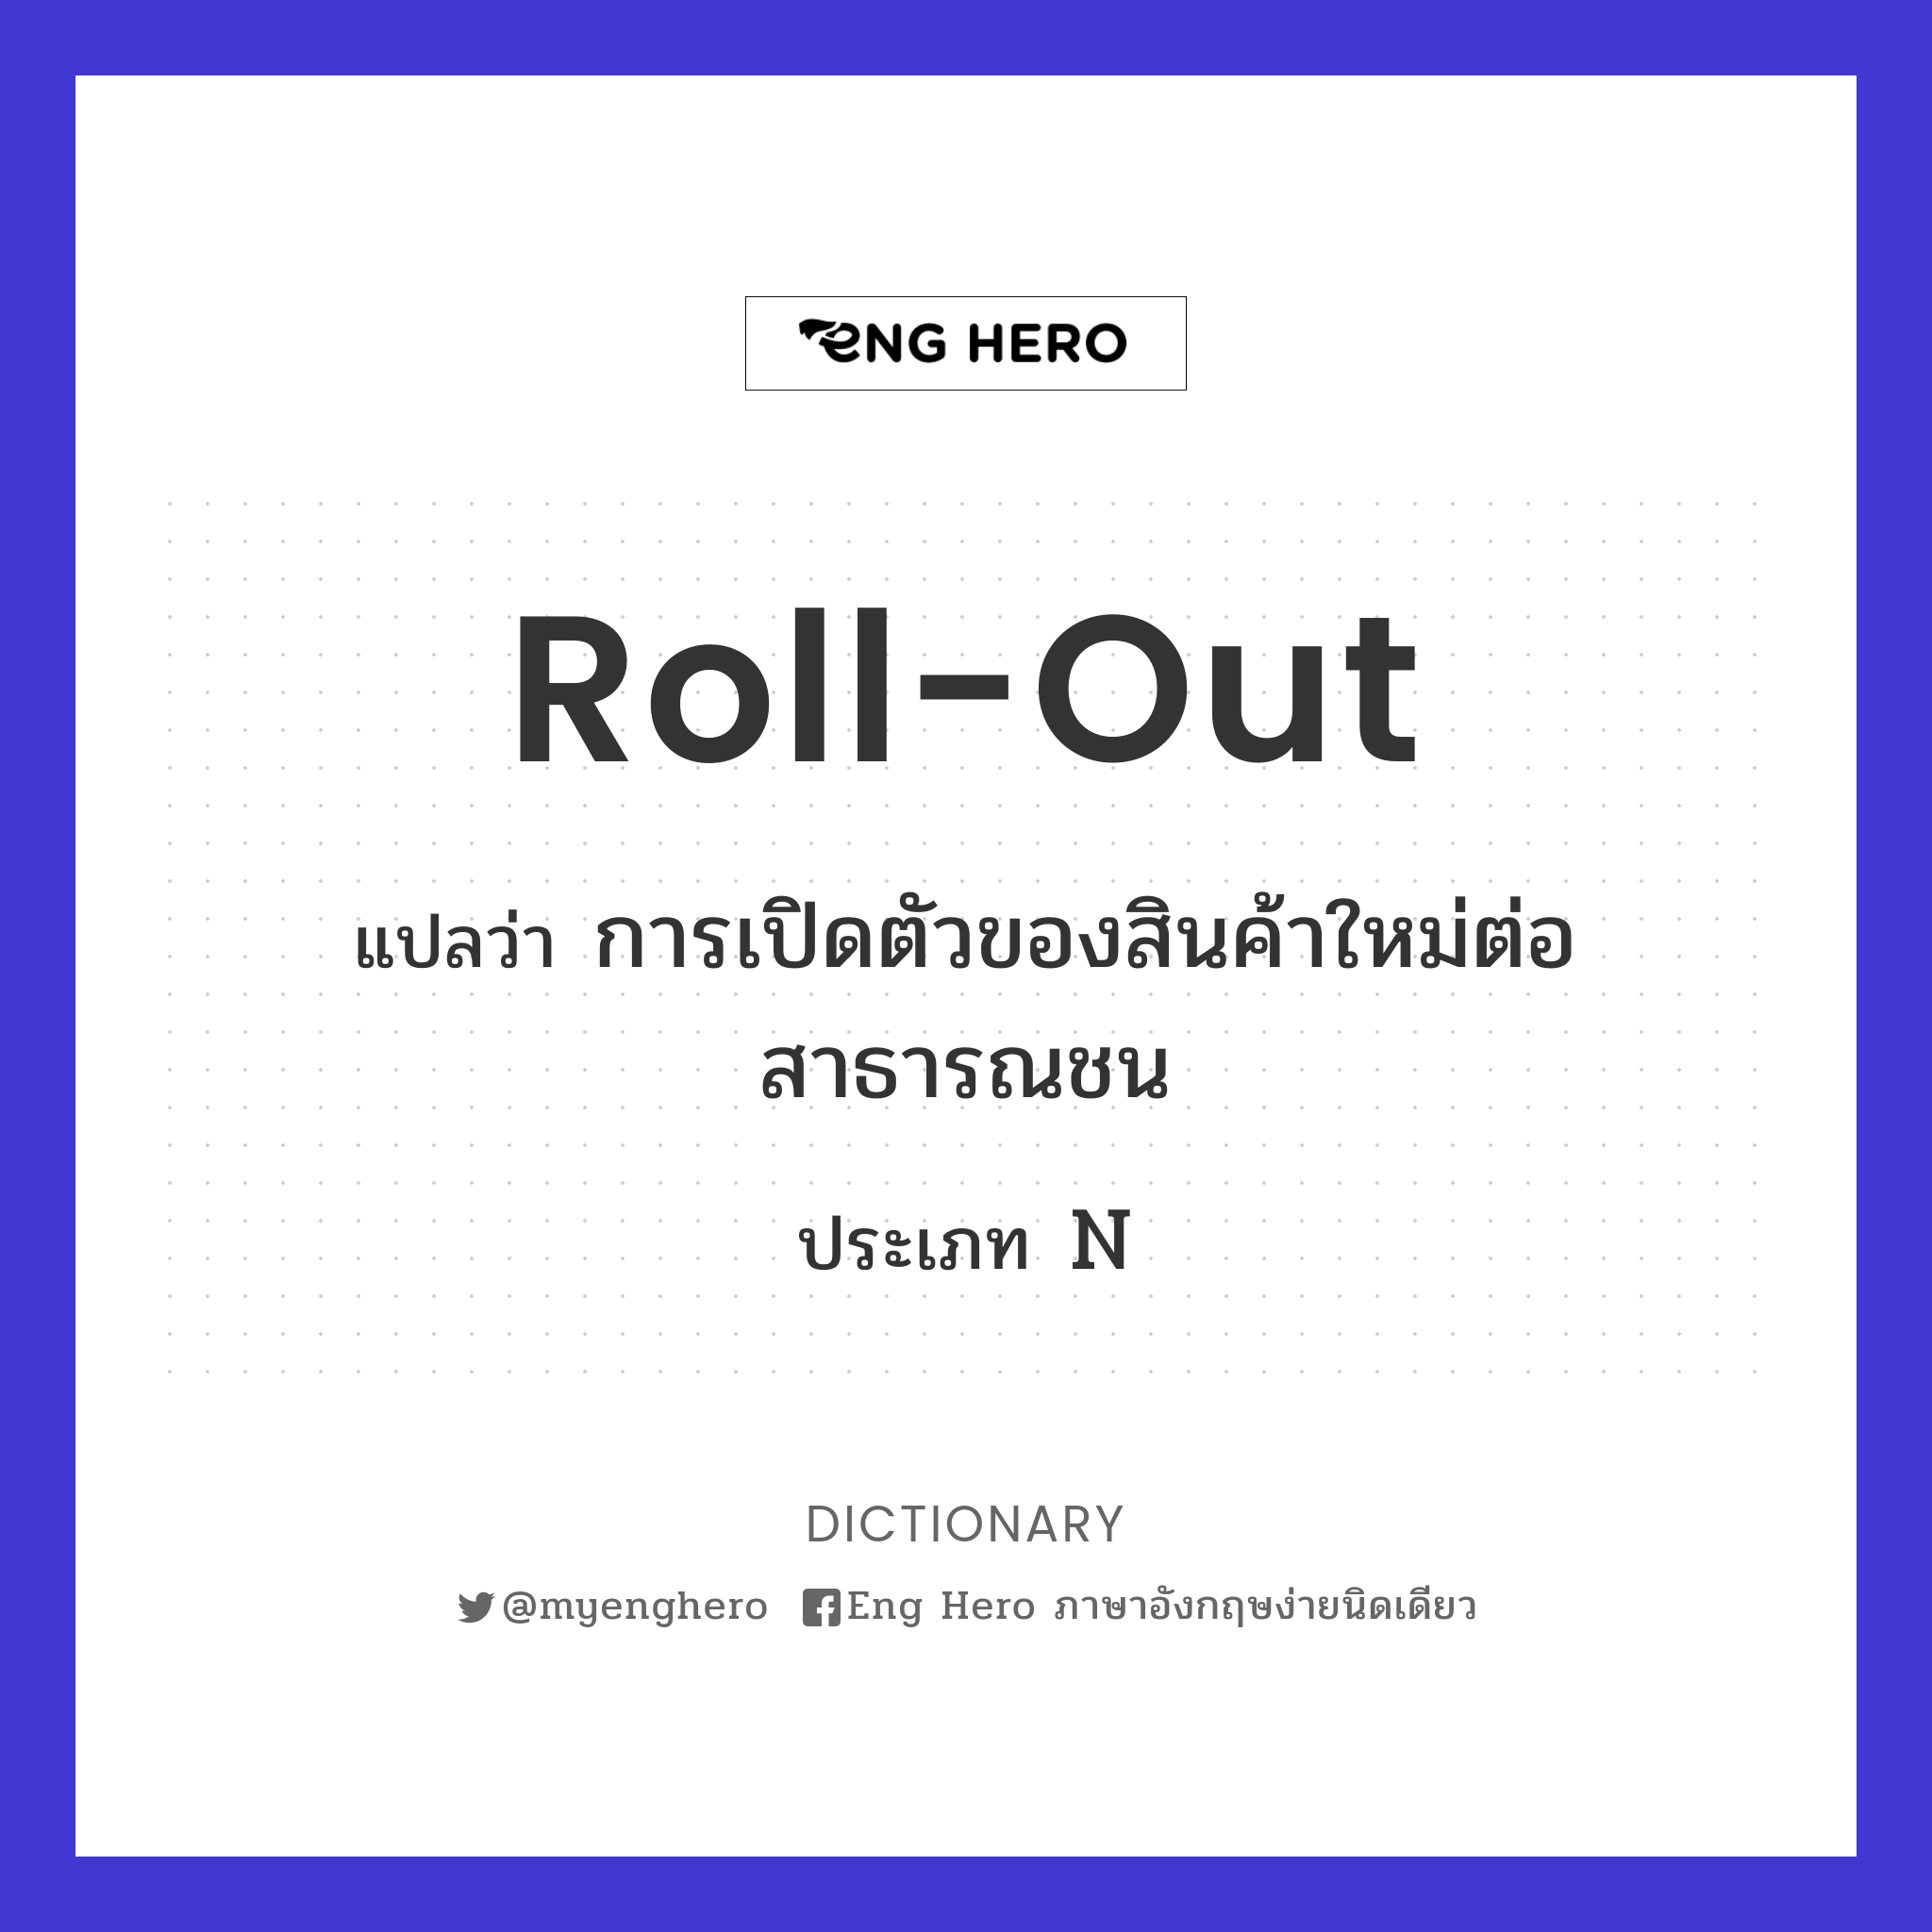 roll-out